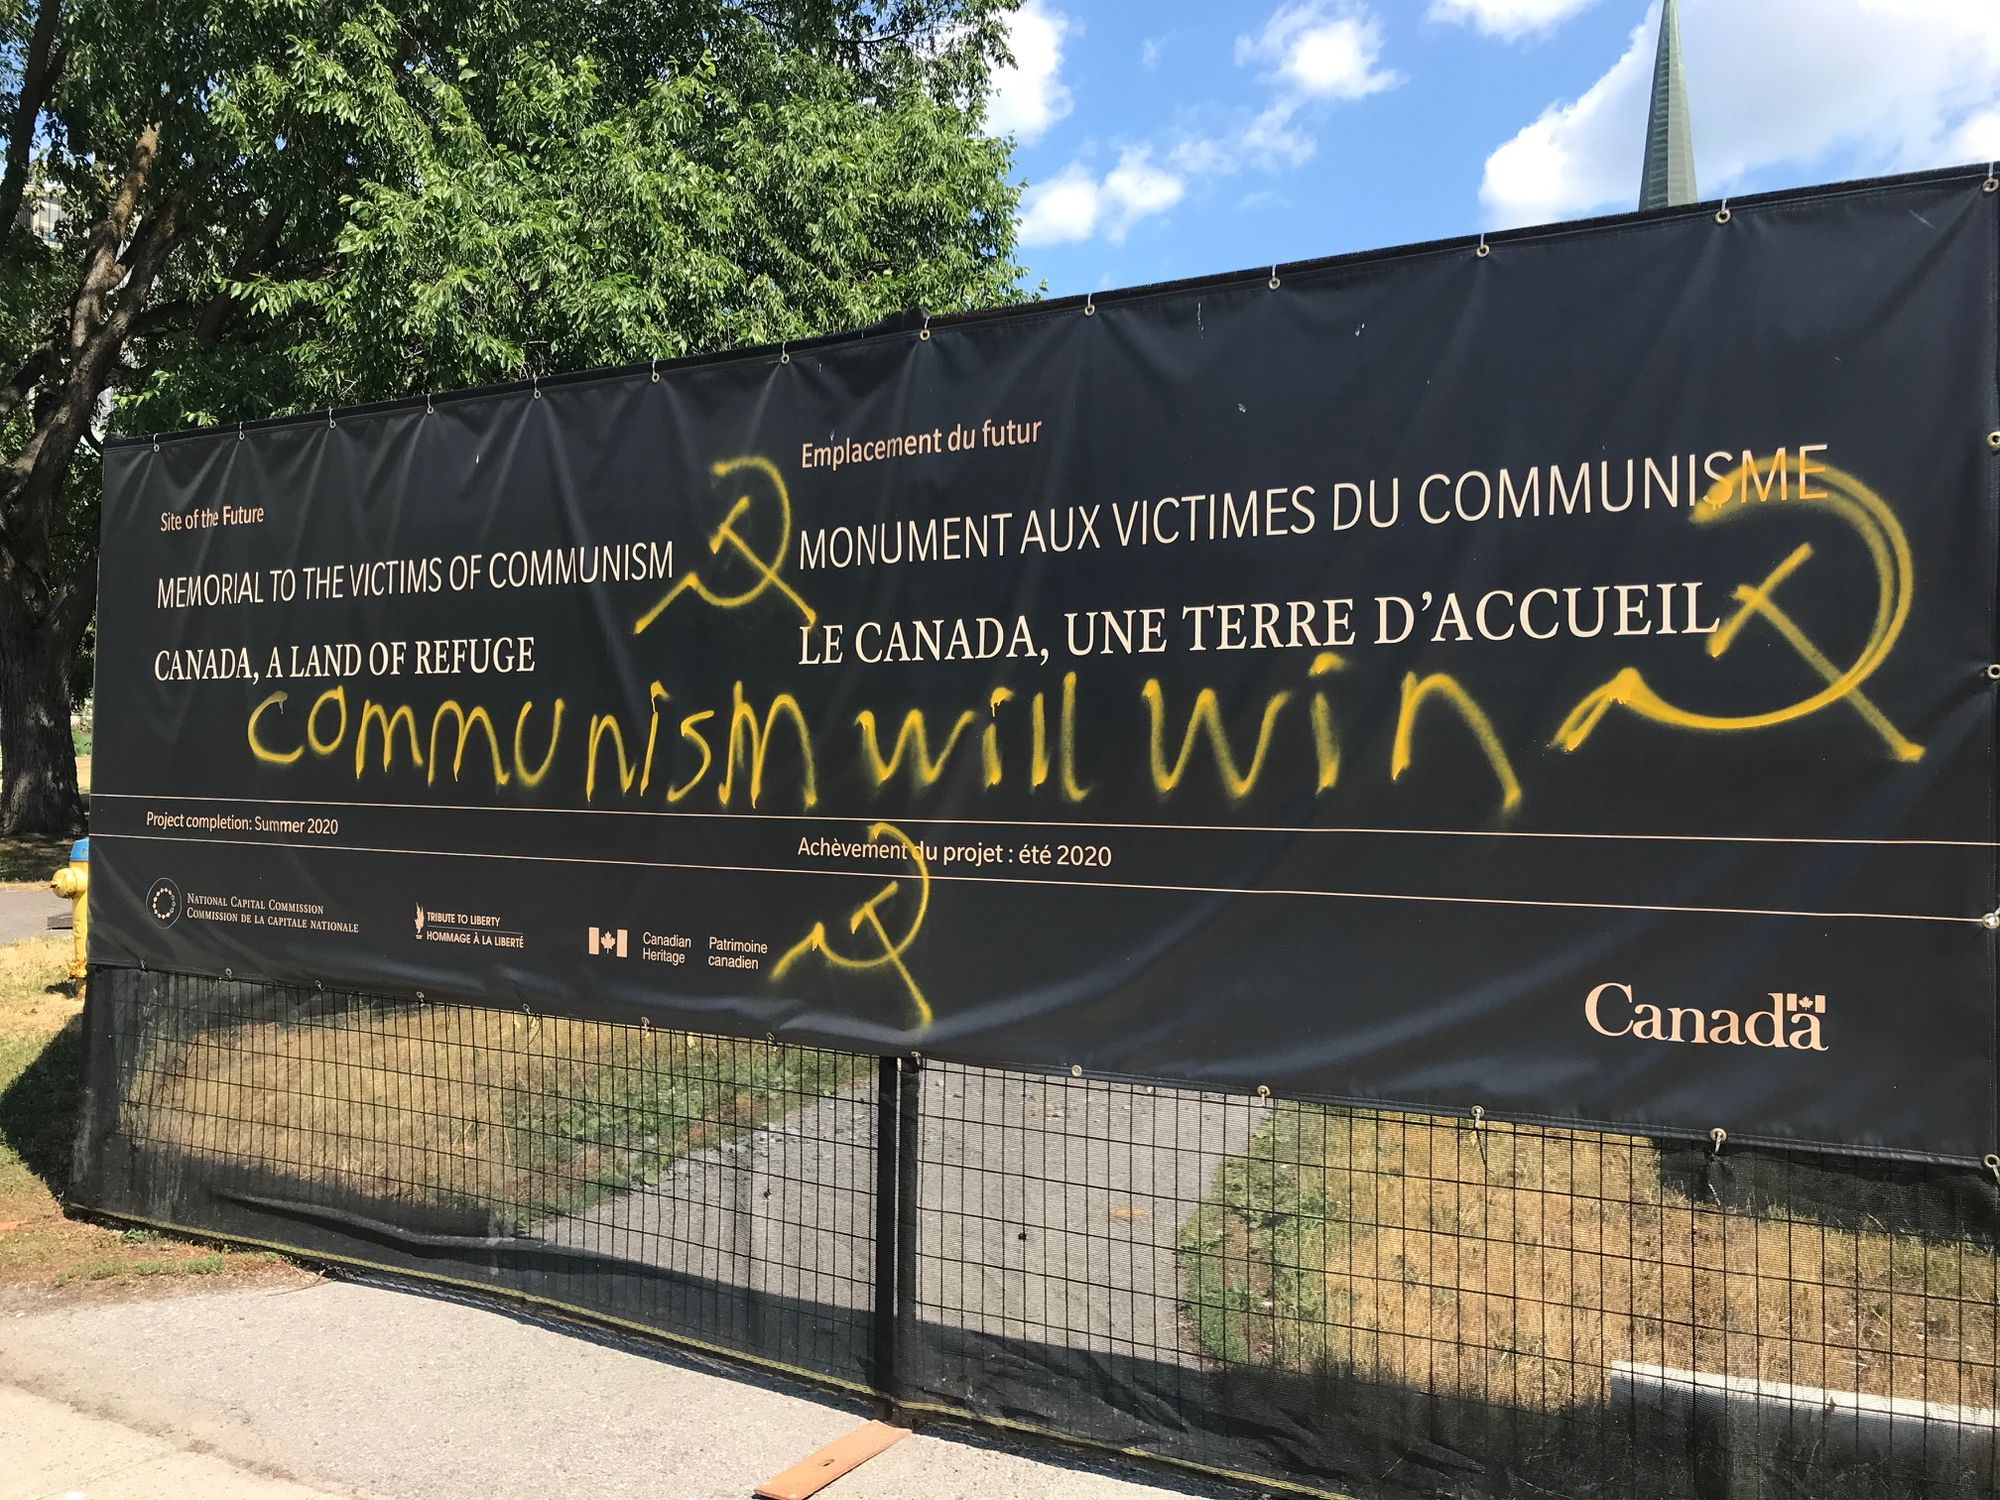 The ‘Memorial to the Victims of Communism’ Should Be Bulldozed